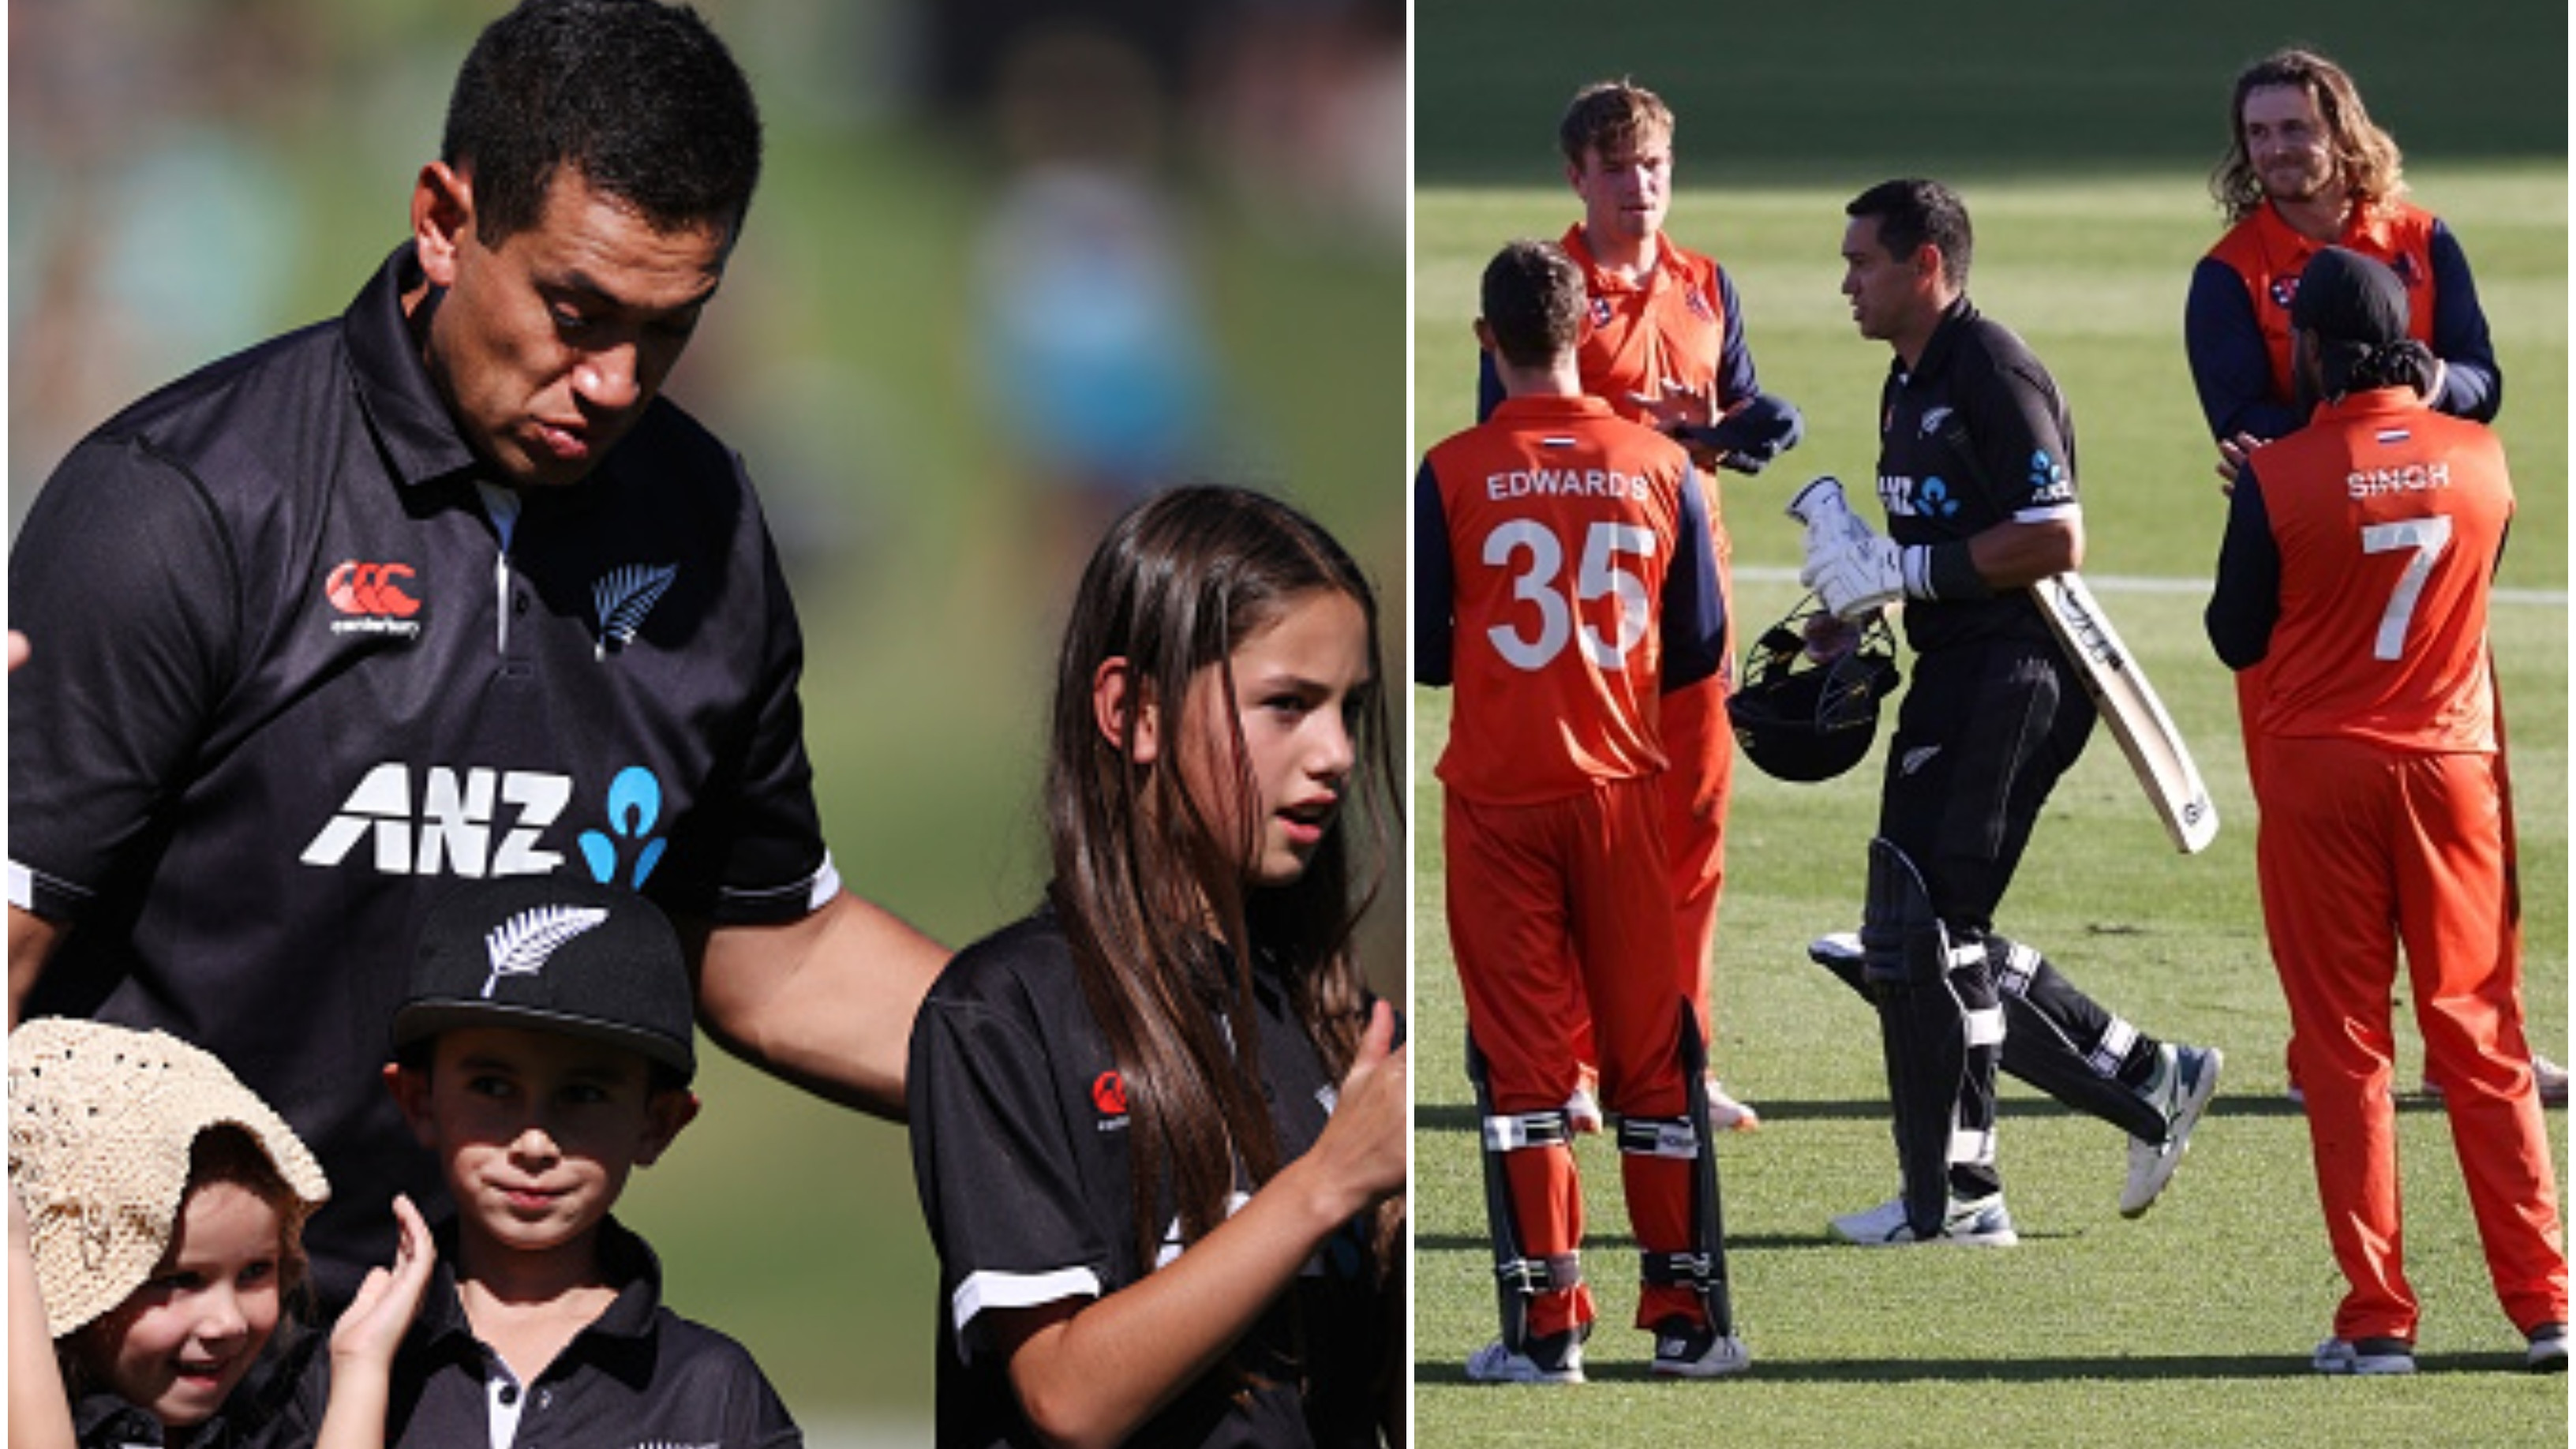 WATCH: Ross Taylor gets emotional during national anthem in his last outing for New Zealand, gets guard of honour